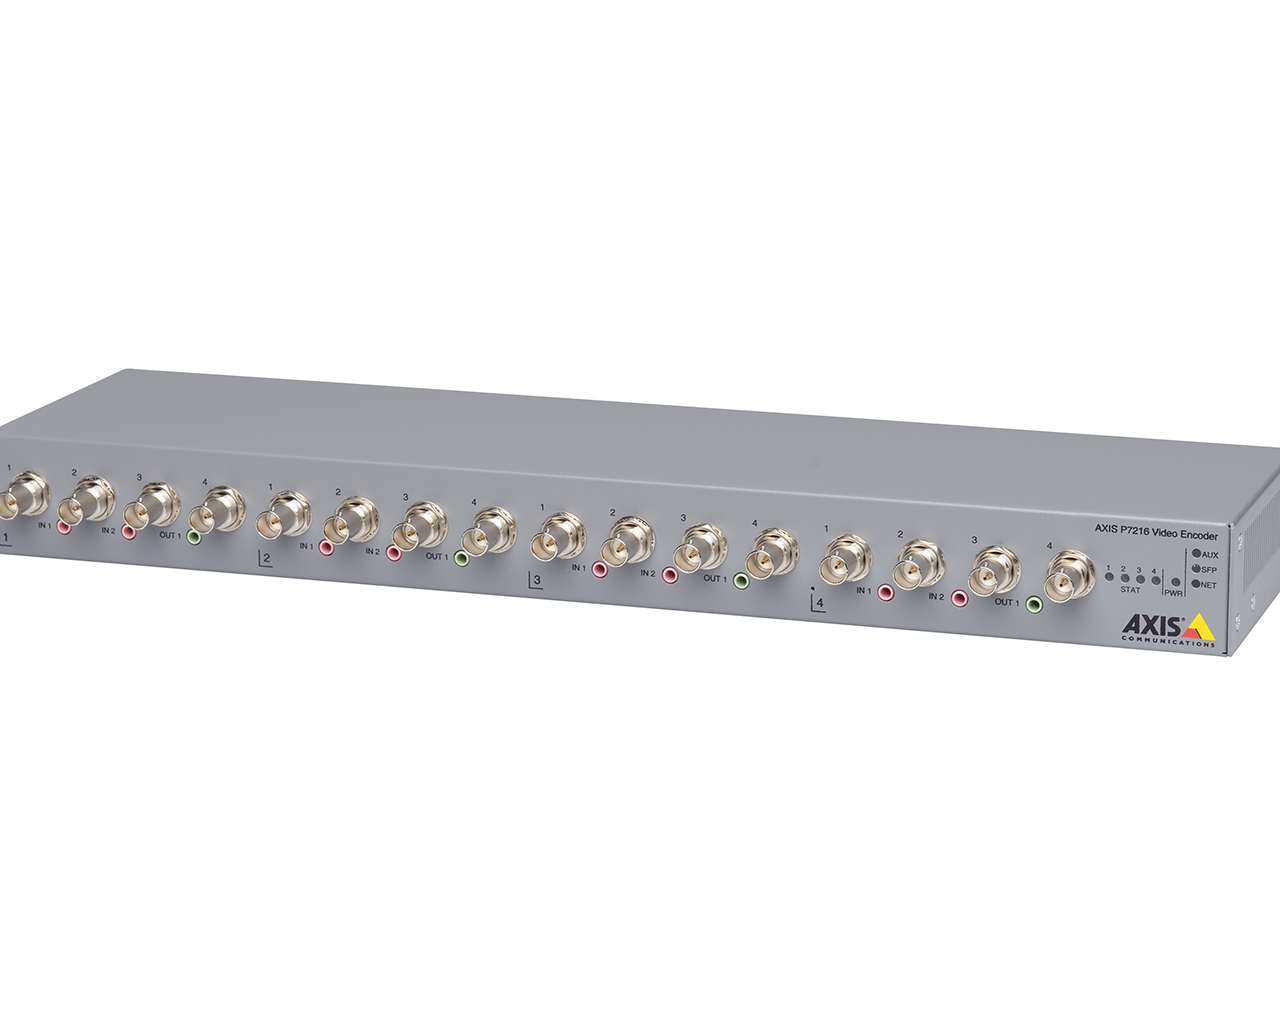 Up to 16 Channels